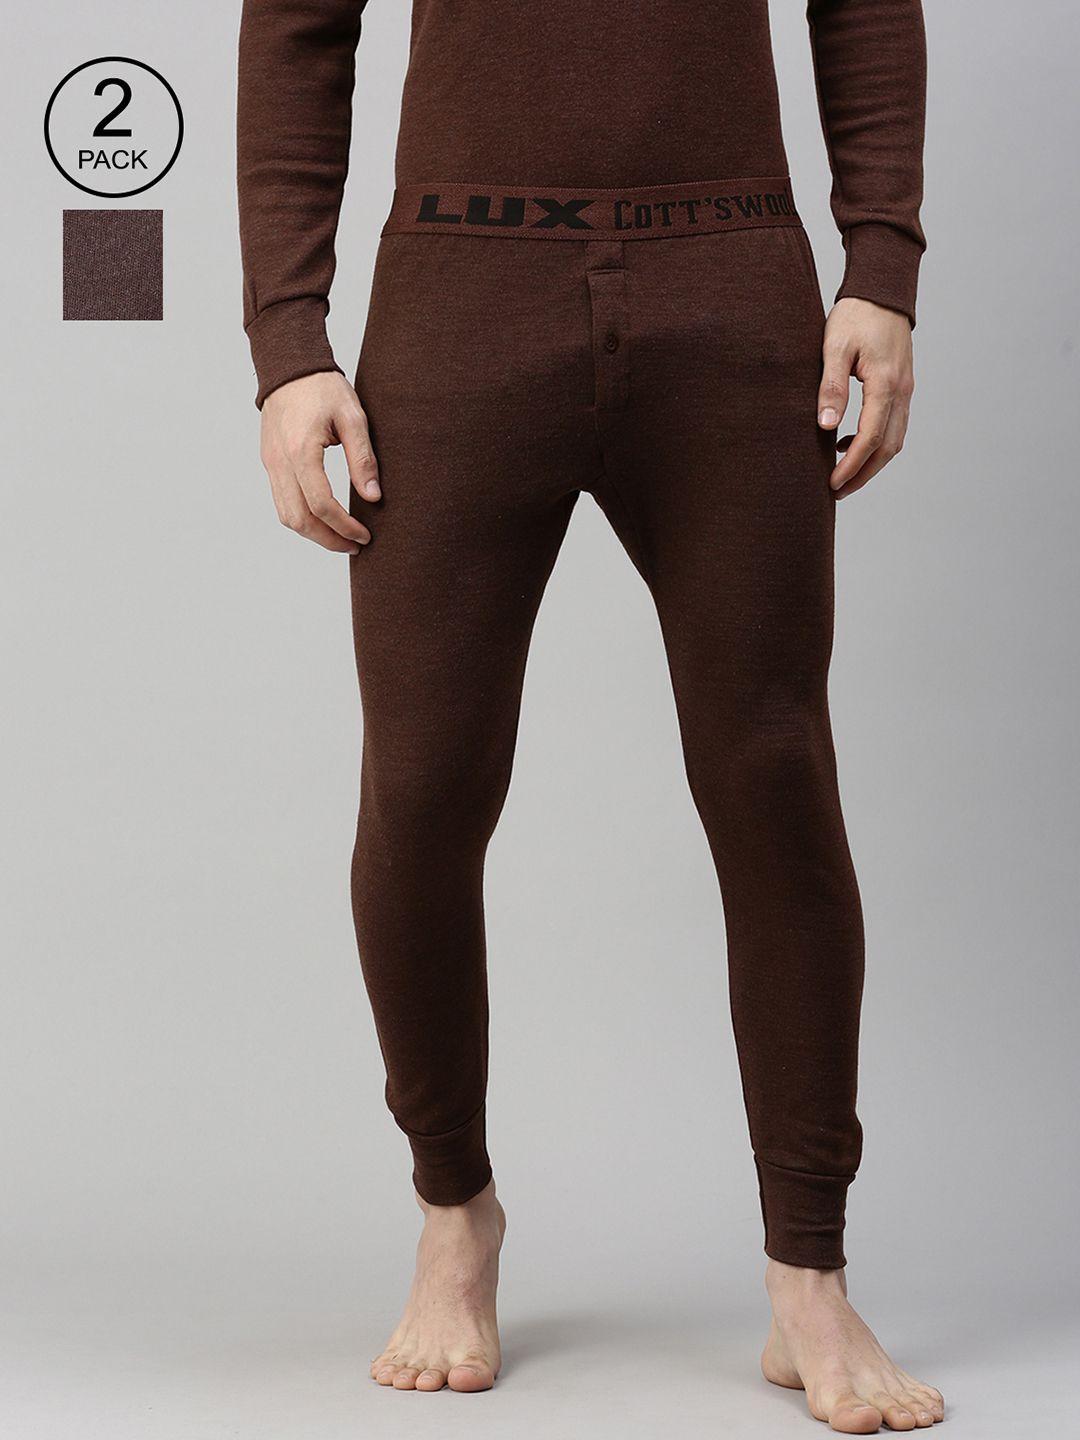 lux cottswool men pack of 2 brown solid cotton thermal bottoms